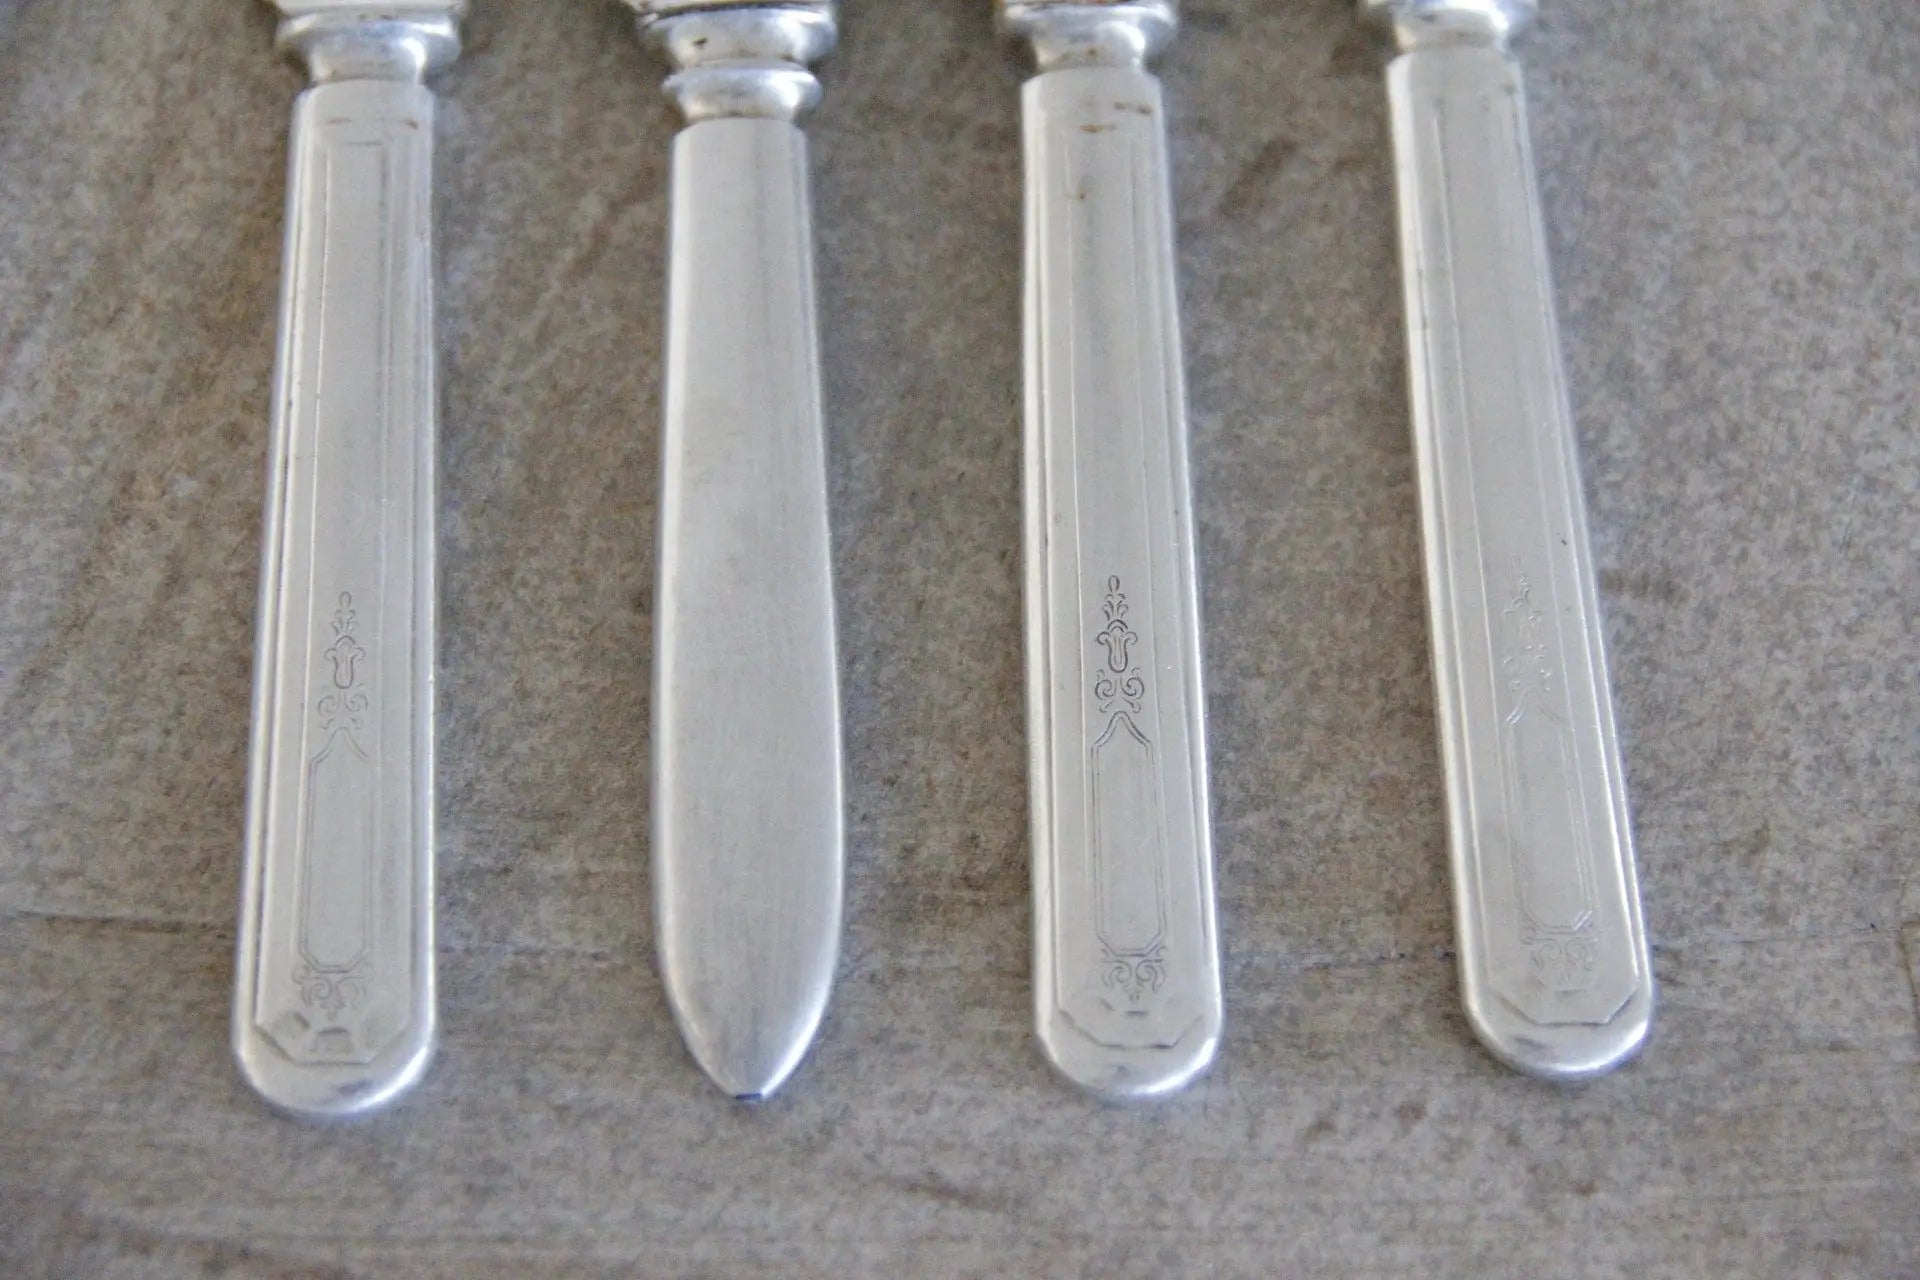 Antique Silver Plated Blunt Table Knife | Flatware 4 Mixed Pcs  Debra Hall Lifestyle